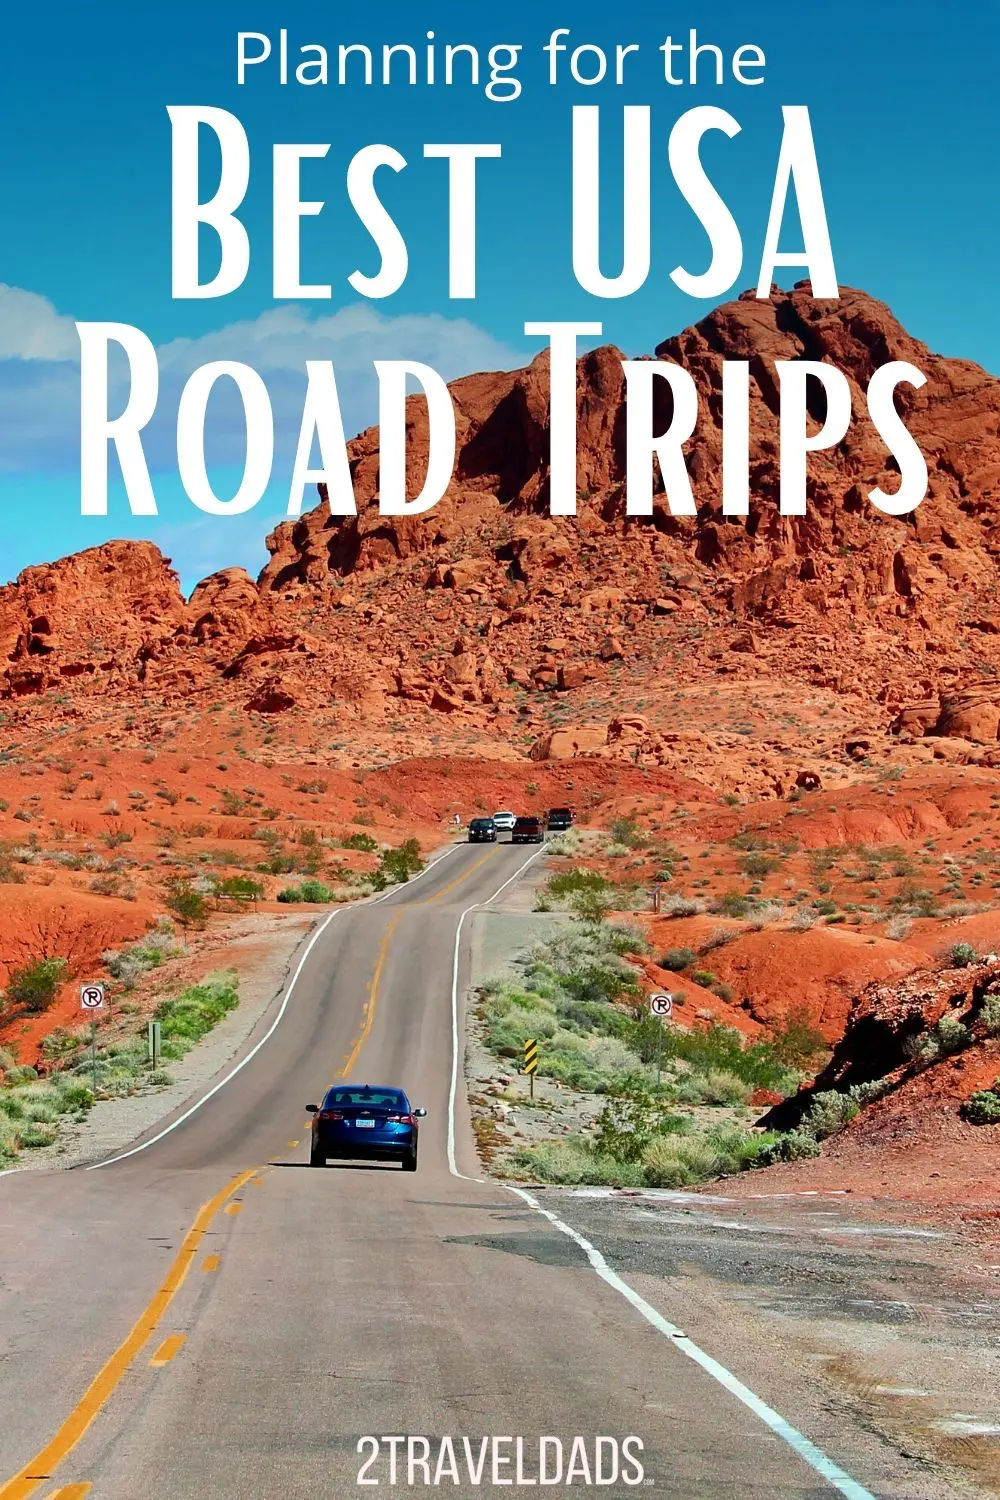 Road Trip planning can be easy, especially if you are open to flying to the start of your trip. Best tips for planning road trip routes using pre-planned itineraries and tools. *And getting kids involved!*